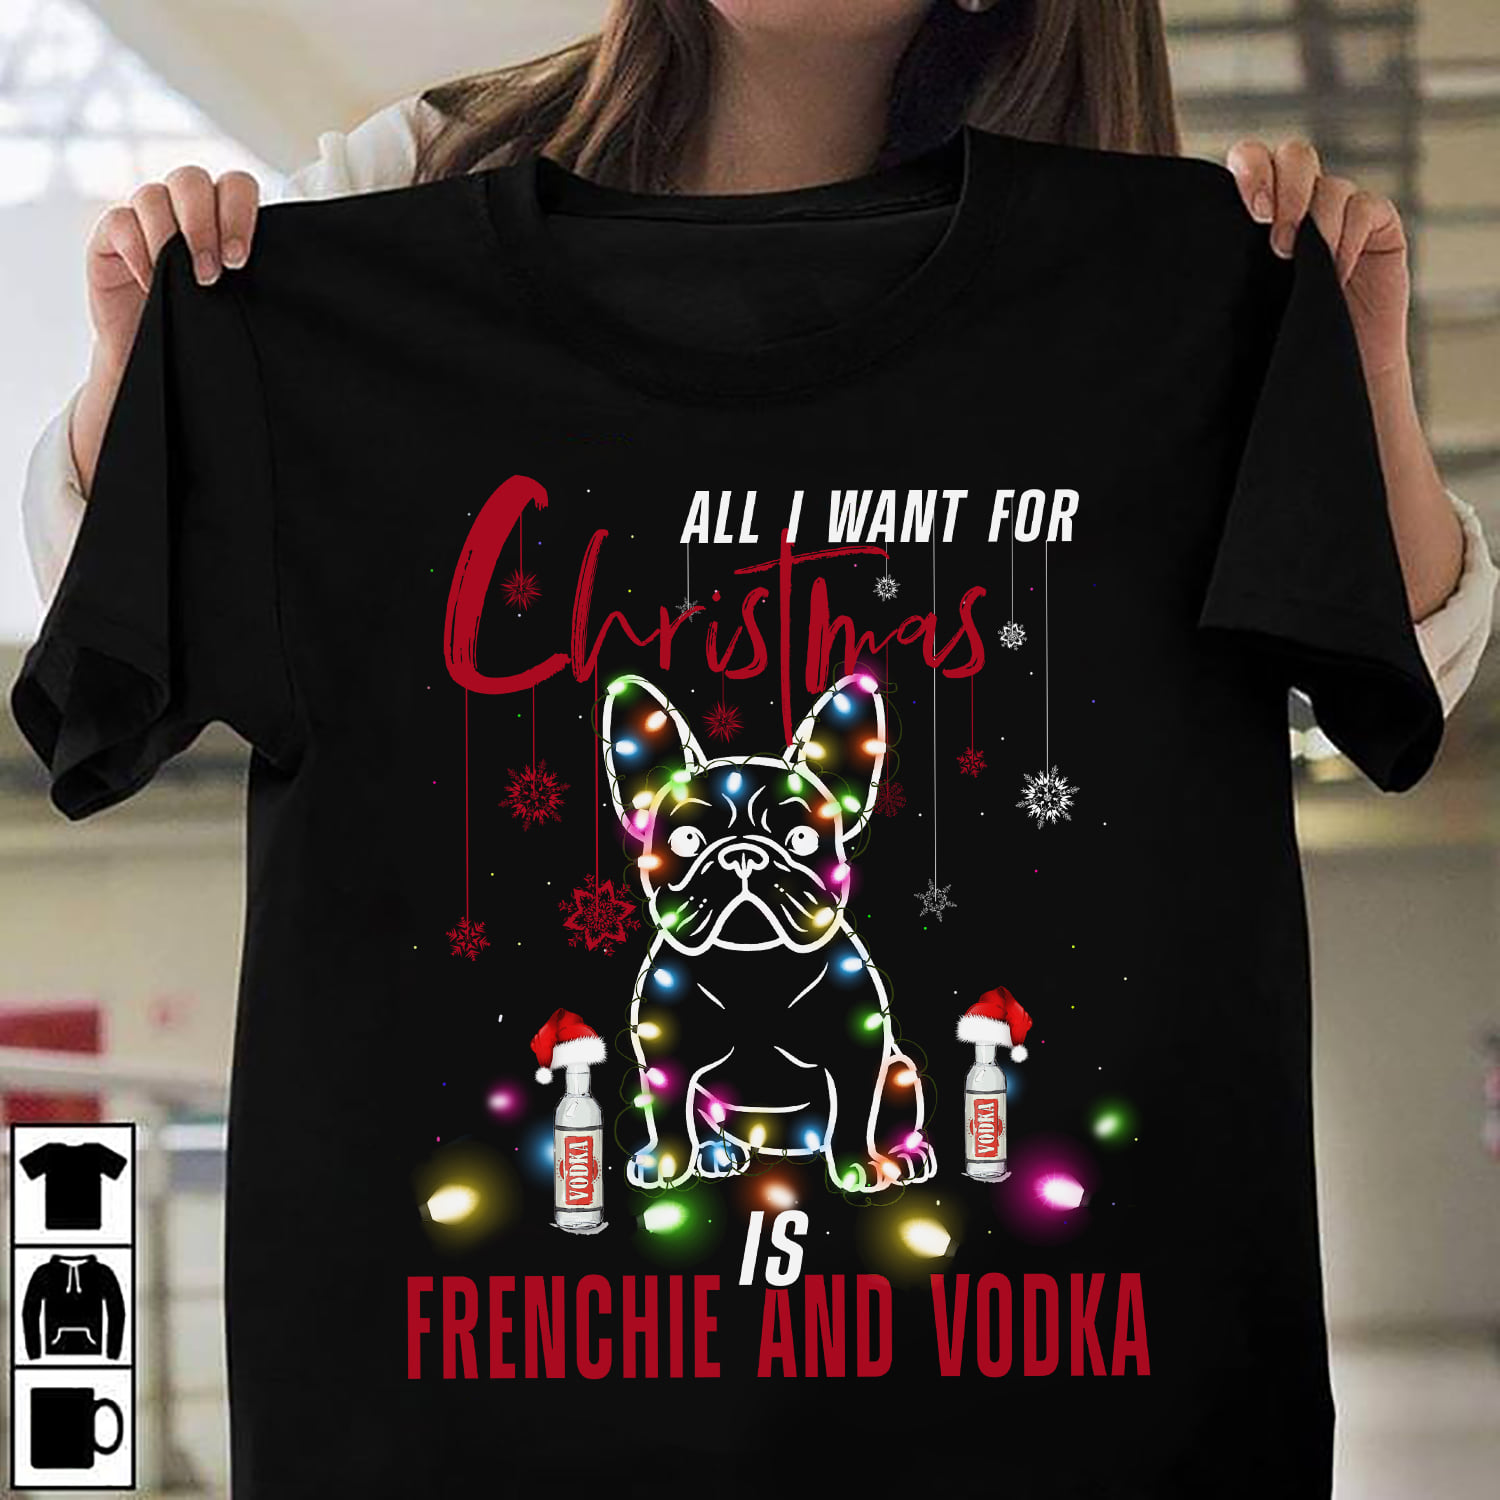 All I want for Christmas is Frenchie and Vodka - Vodka for Christmas, Christmas day ugly sweater